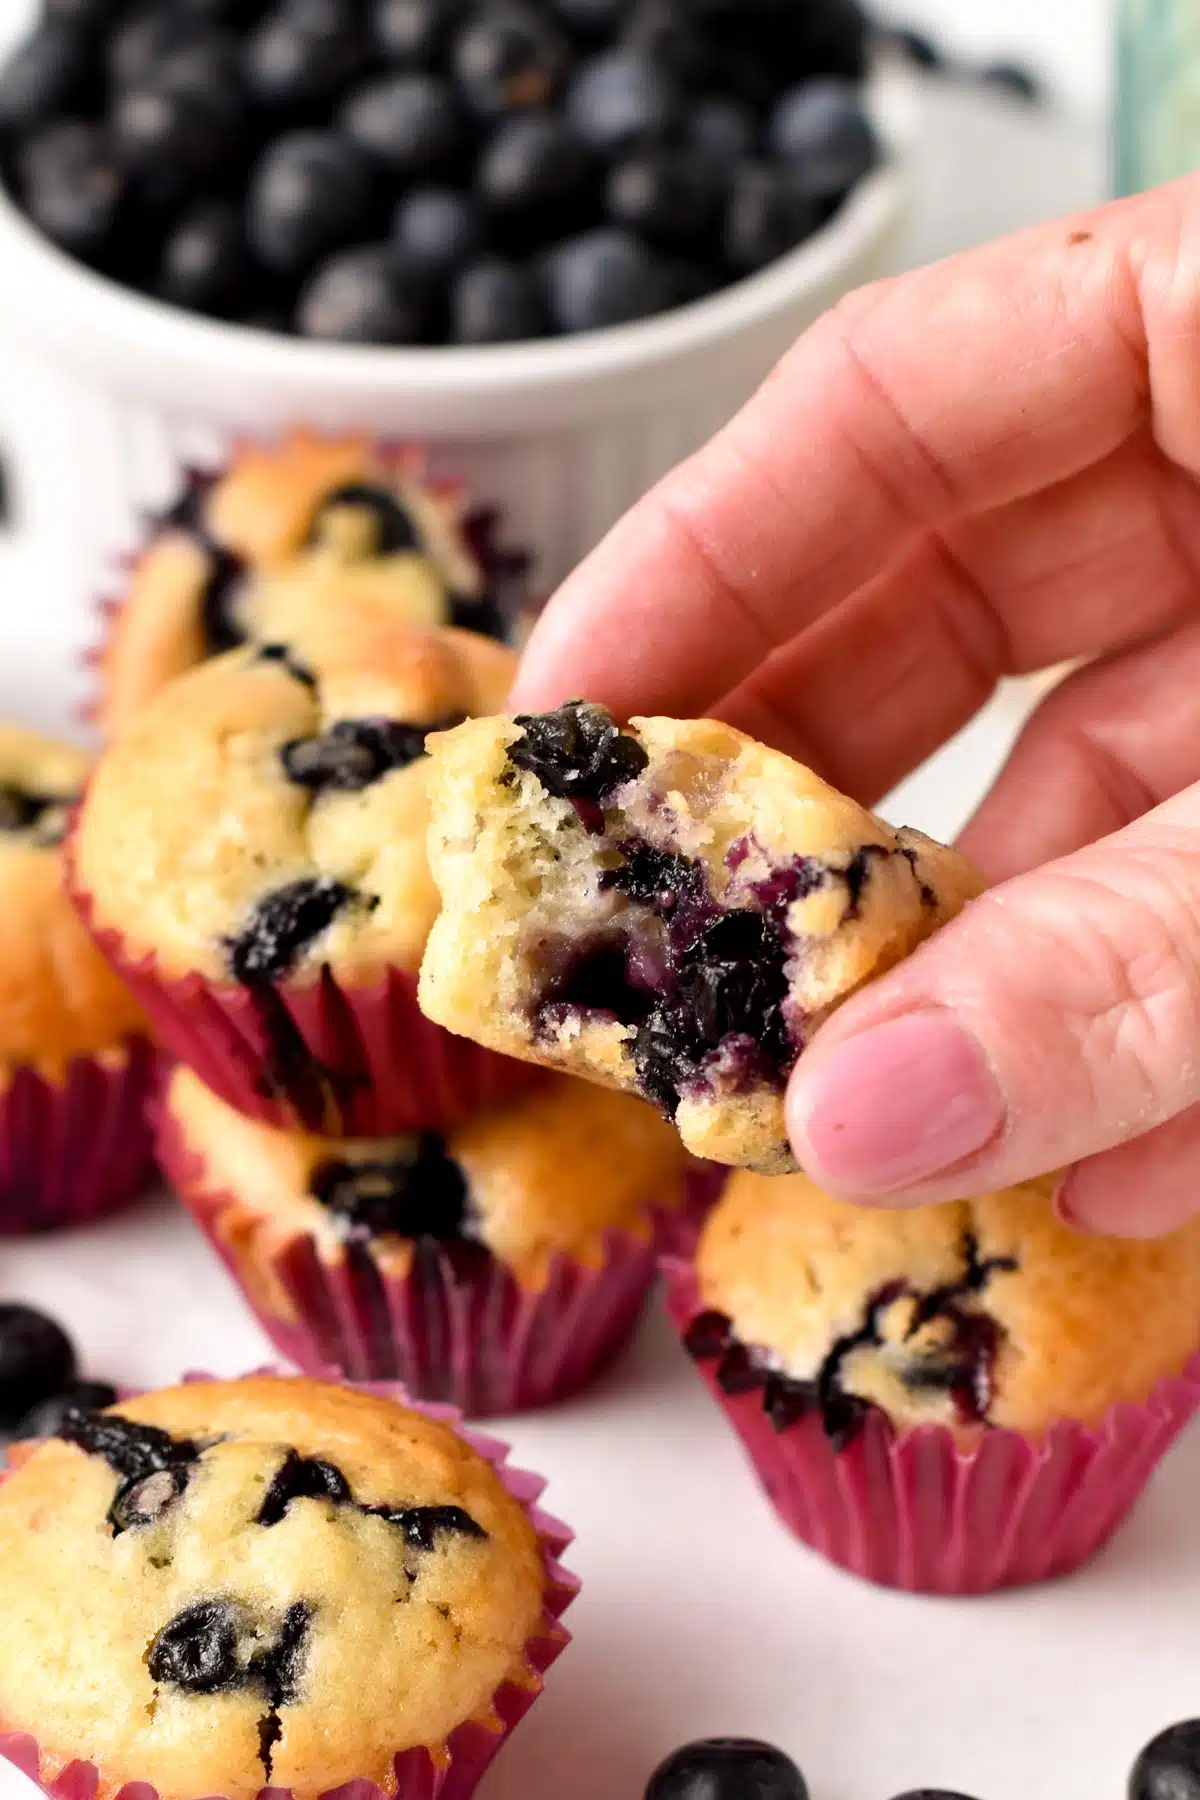 These mini blueberry muffins are tasty small-serve blueberry muffins filled with juicy blueberries and fluffy vanilla crumbs. They are perfect for kids' lunchboxes or small hands.